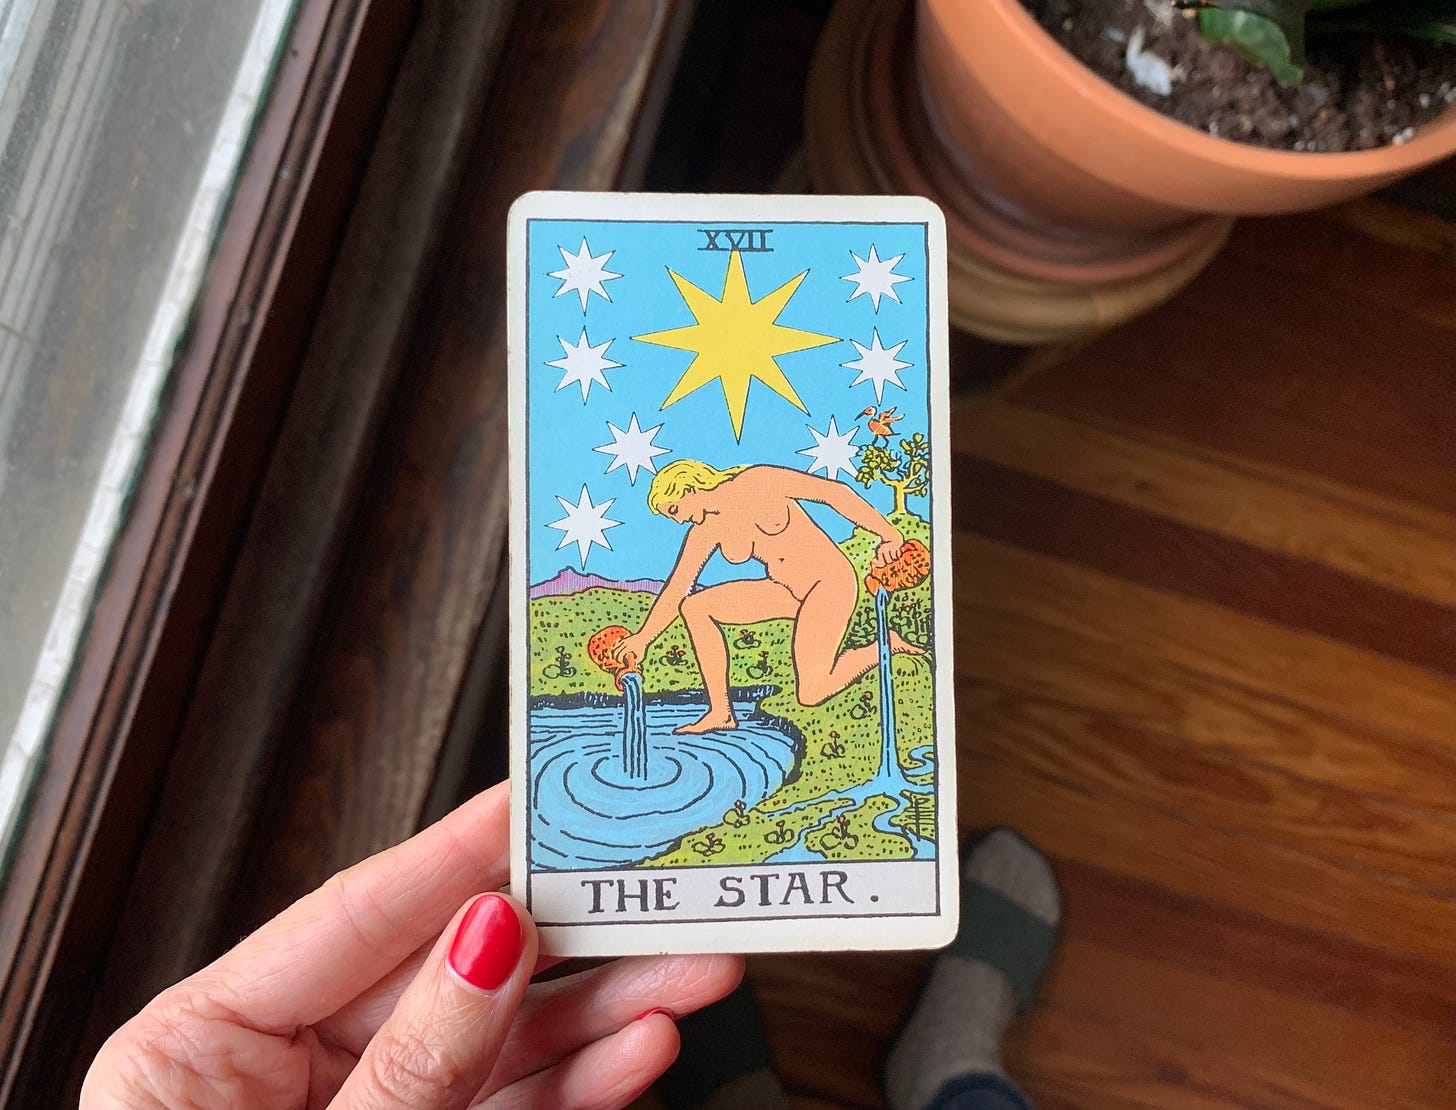 A hand is holding a tarot card, The Star by Pamela Colman Smith for the Rider-Waite-Smith Tarot. In the image a person is kneeling next to a small pool of water, they have one knee down on the earth and one foot in the water. They are holding to water vessels and pouring water onto the land and into the pool at once. There are stars, with one big yellow one in the center. Behind the card is a wooden window sill, a big plant and a wood floor. The person holding the card is wearing wool socks and slides, which are visible in the background.